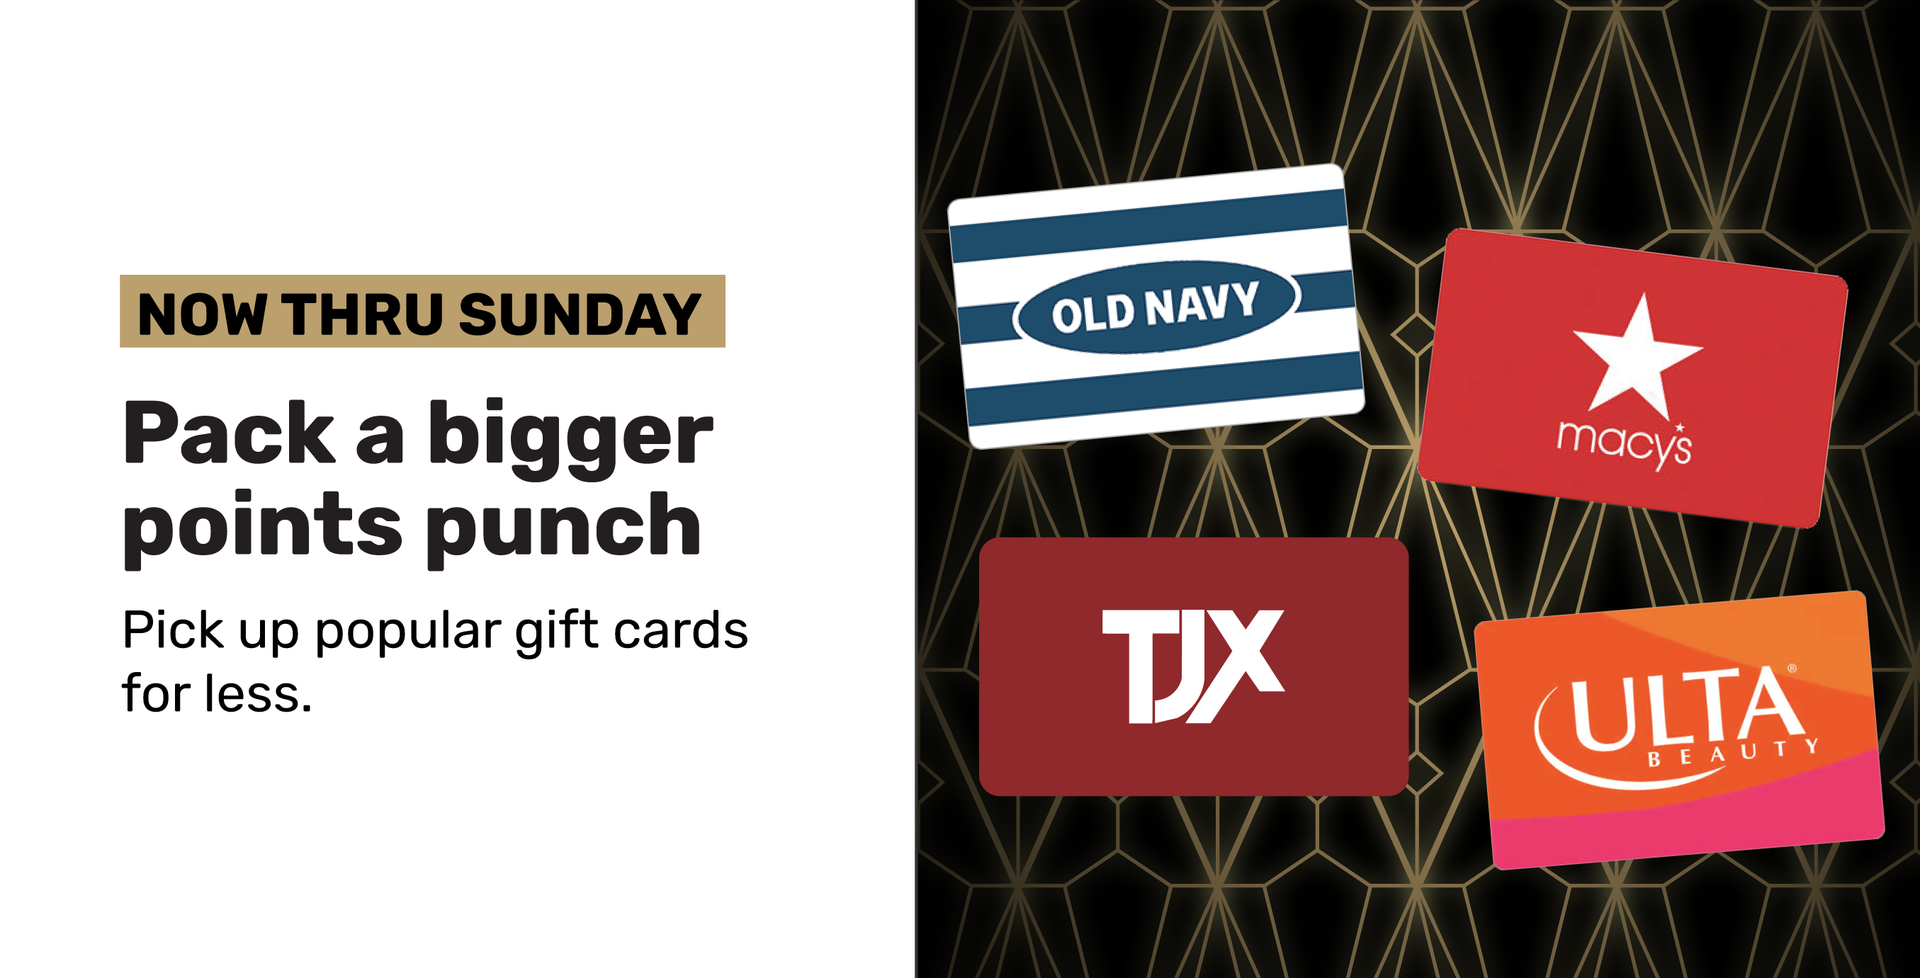 Now thru Sunday. Pack a bigger points punch. Pick up popular gift cards for less.